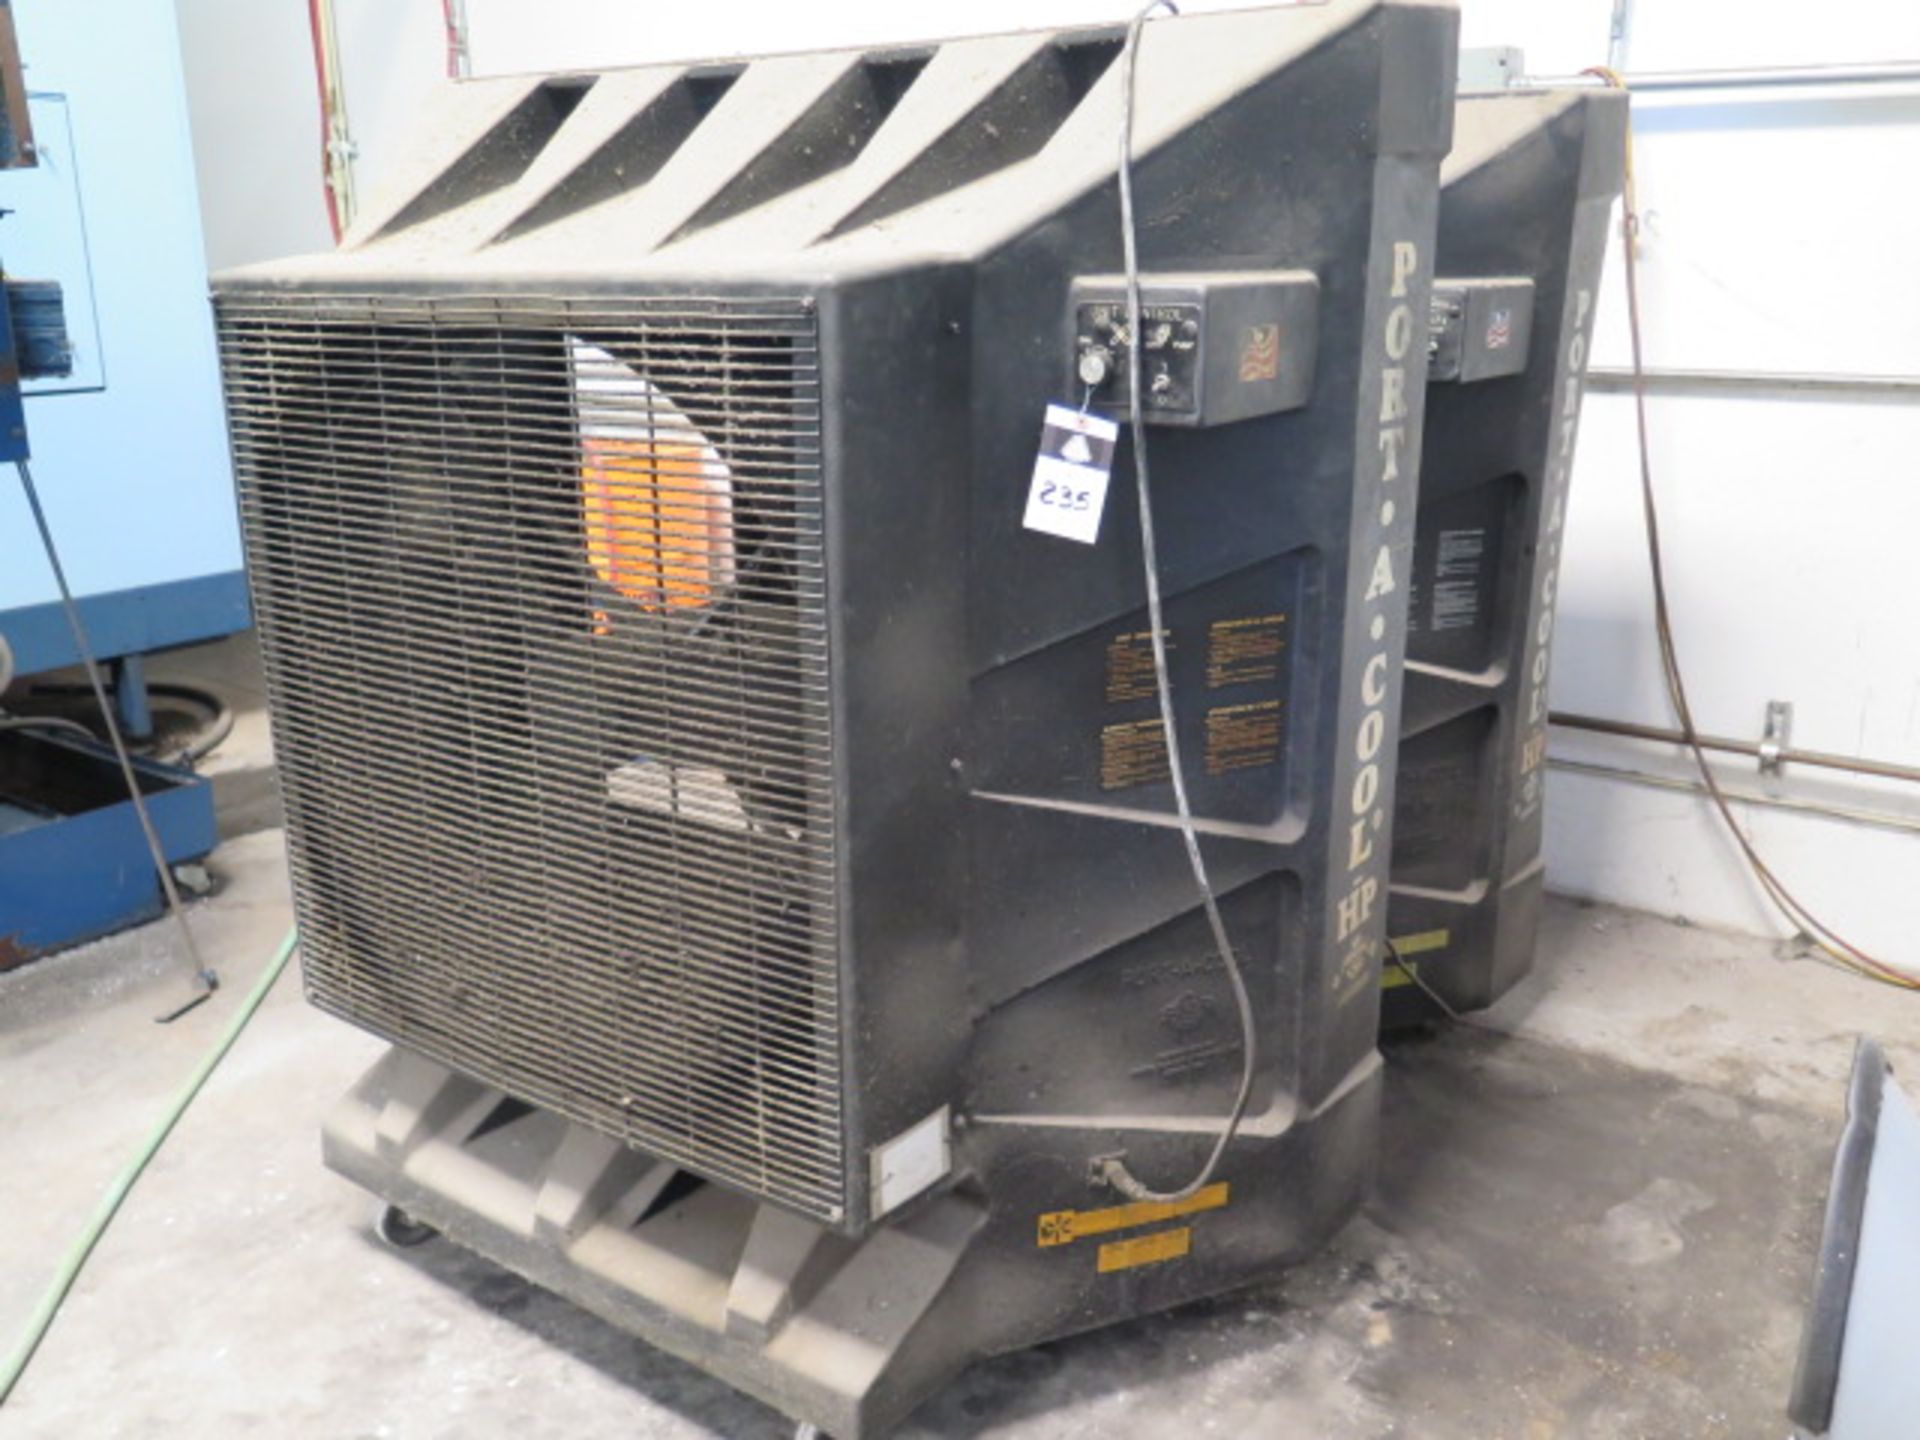 Porta-Cool mdl. HP Portable Swamp Cooler (NEEDS Filter Element) (SOLD AS-IS - NO WARRANTY)